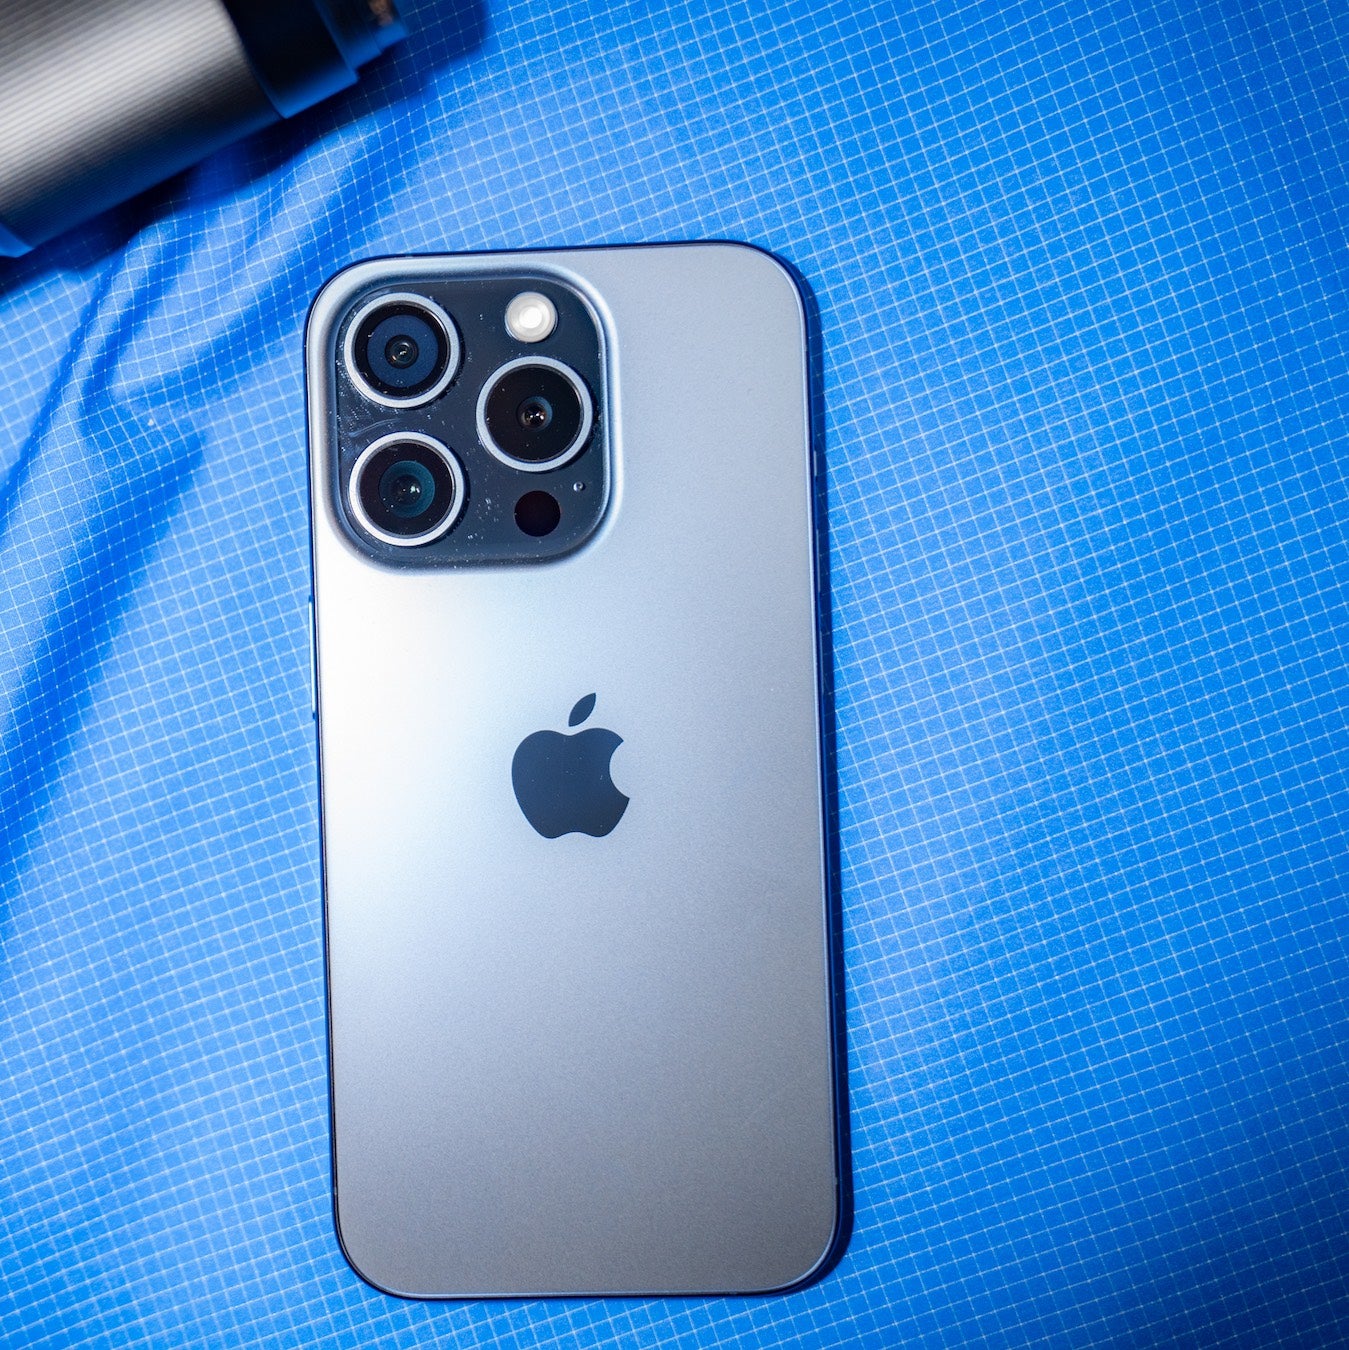 iPhone 15 Pro Max: 50 photos that show what the new camera system